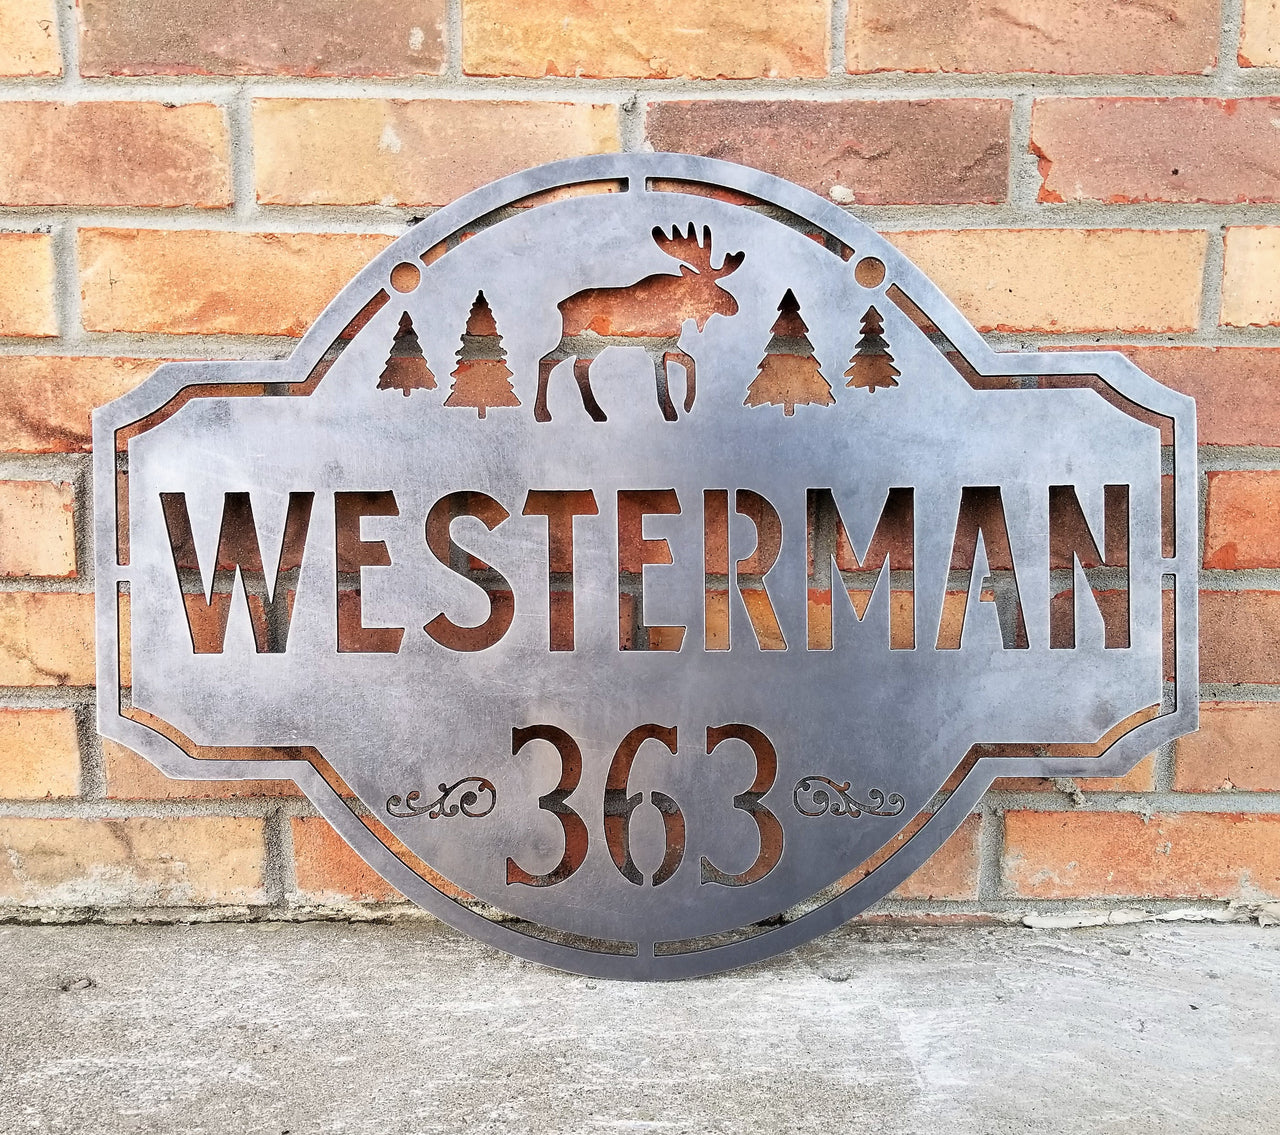 This is a personalized metal address sign that hangs from a hanging bracket mounted to a wooden post.  The sign features a forest scene with a moose in the center. The sign reads, "Westerman 363".